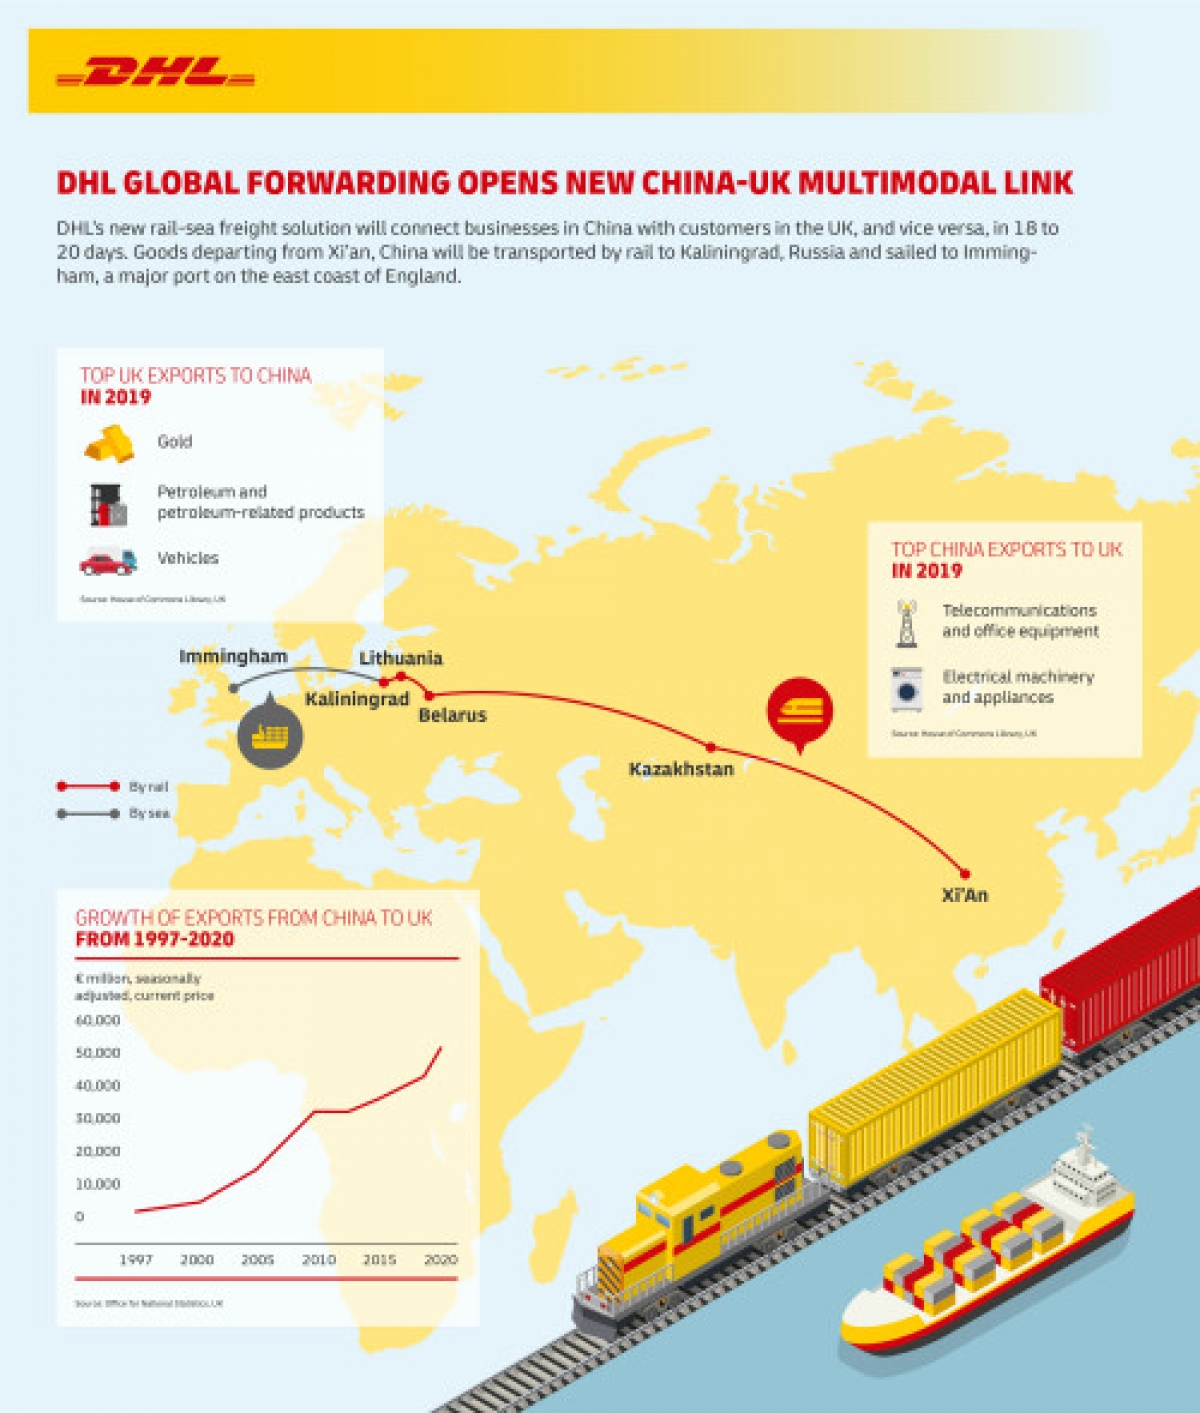 Dhl Global Forwarding Opens New Direct China-United Kingdom Multimodal Link | Vietnam Times